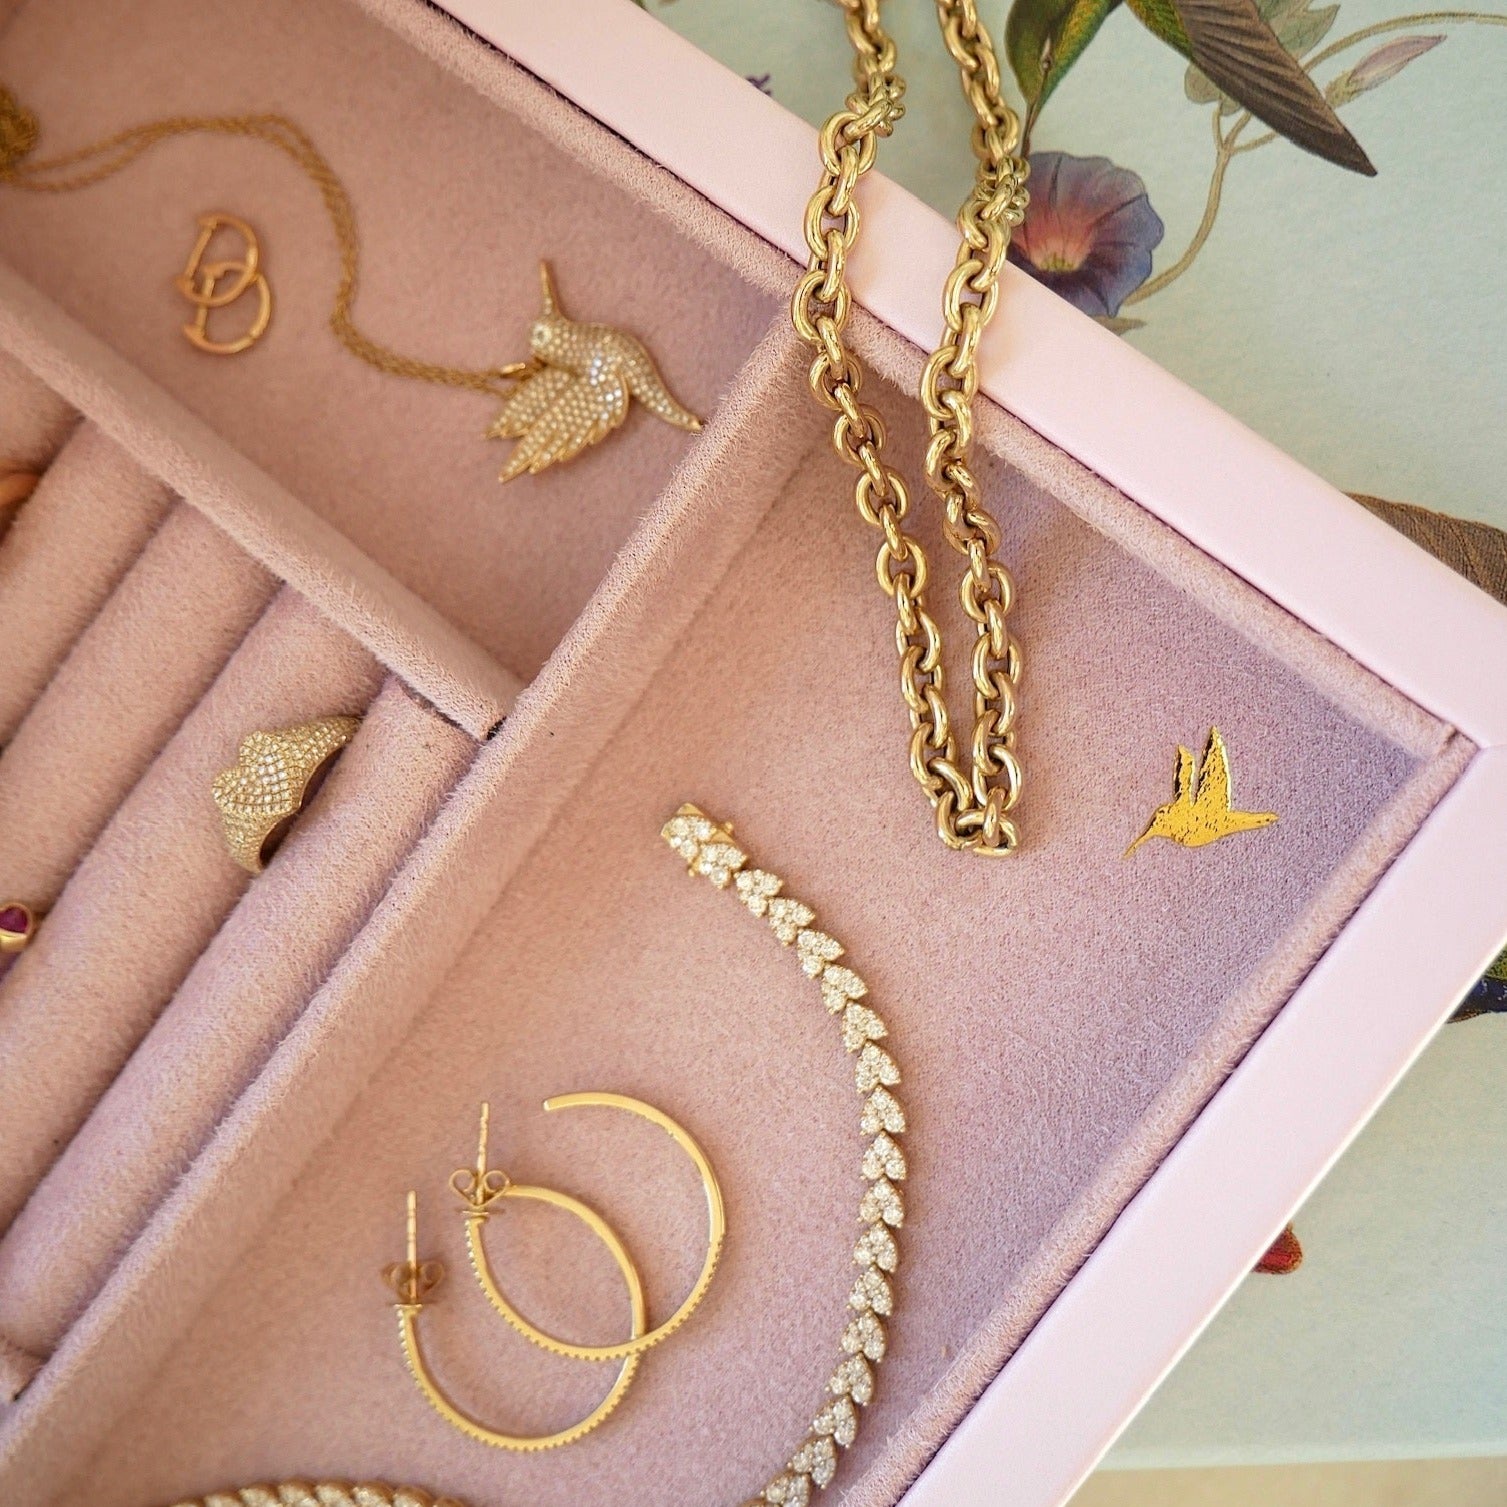 Signature Jewelry Box in the color pink embossed in corner with a golden hummingbird, displayed with 14k yellow gold jewelry with diamonds